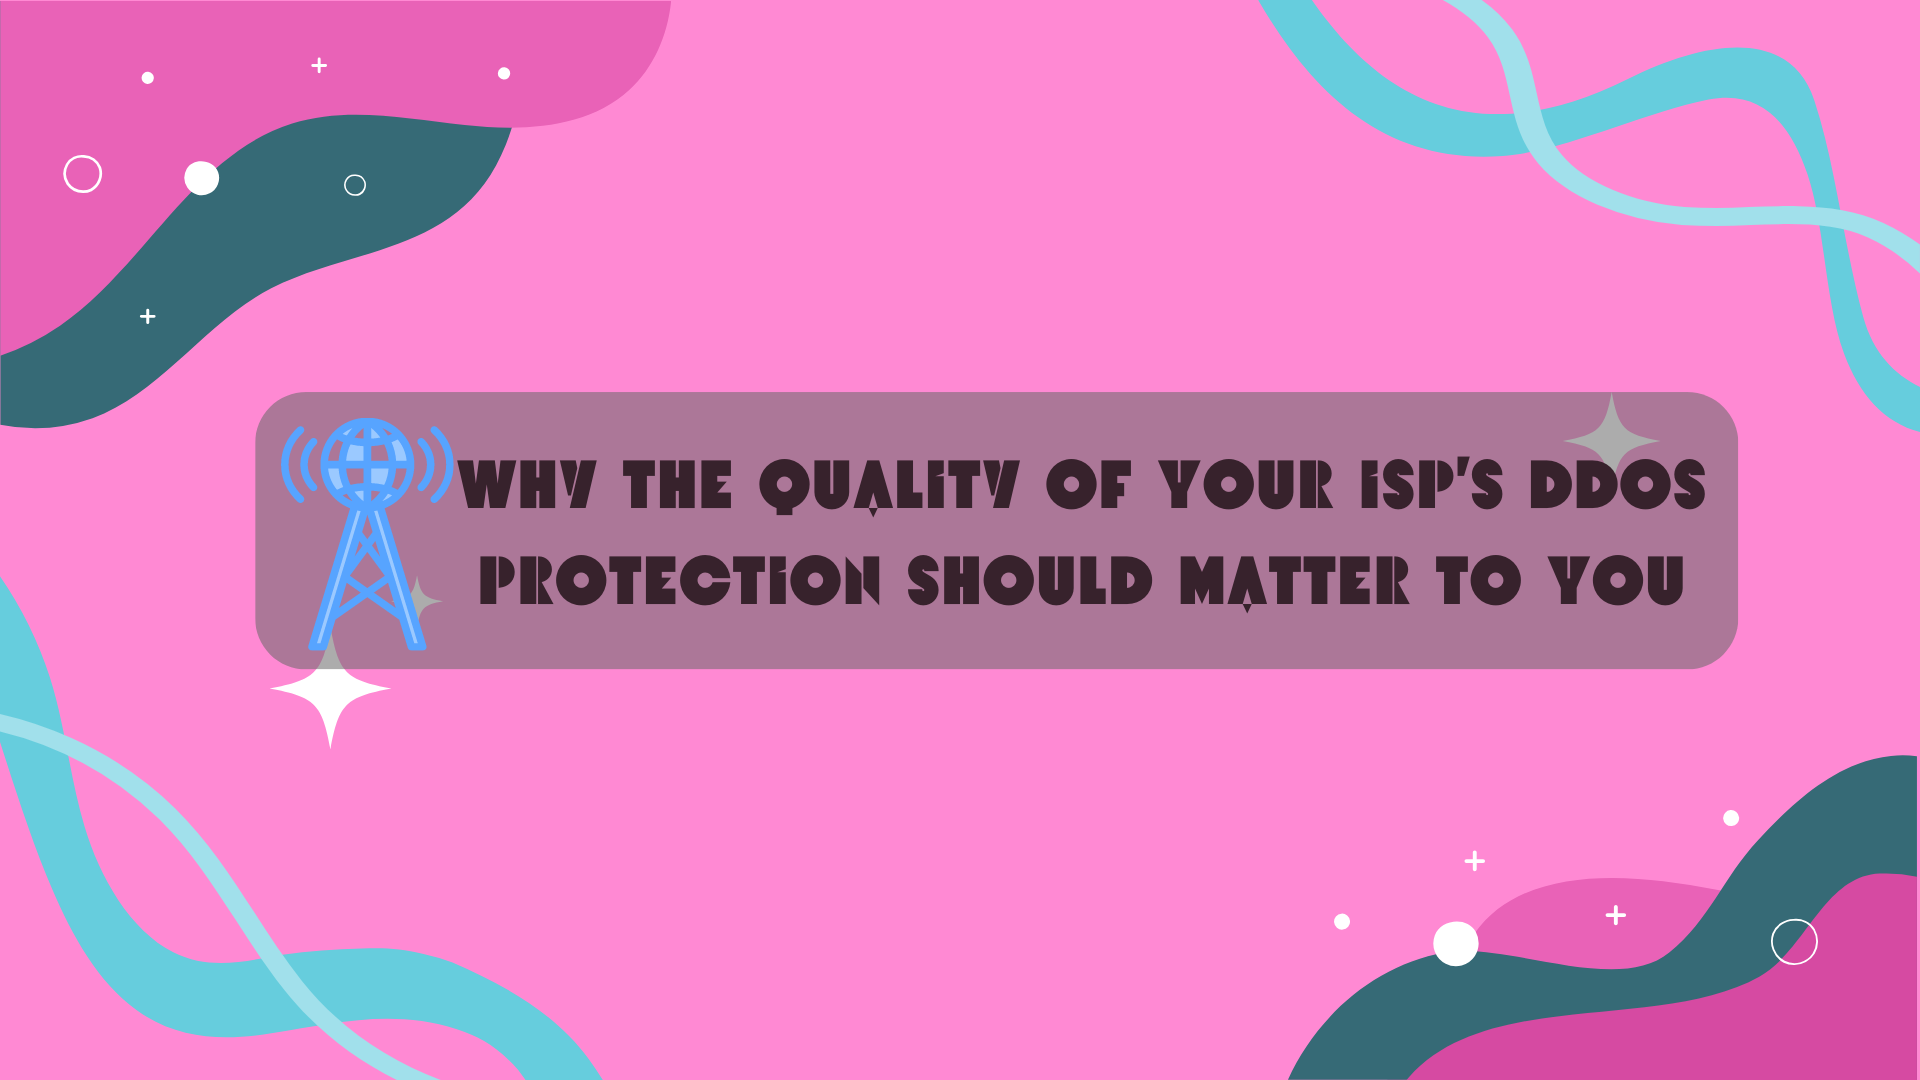 Why the Quality of Your ISP's DDoS Protection Should Matter to You